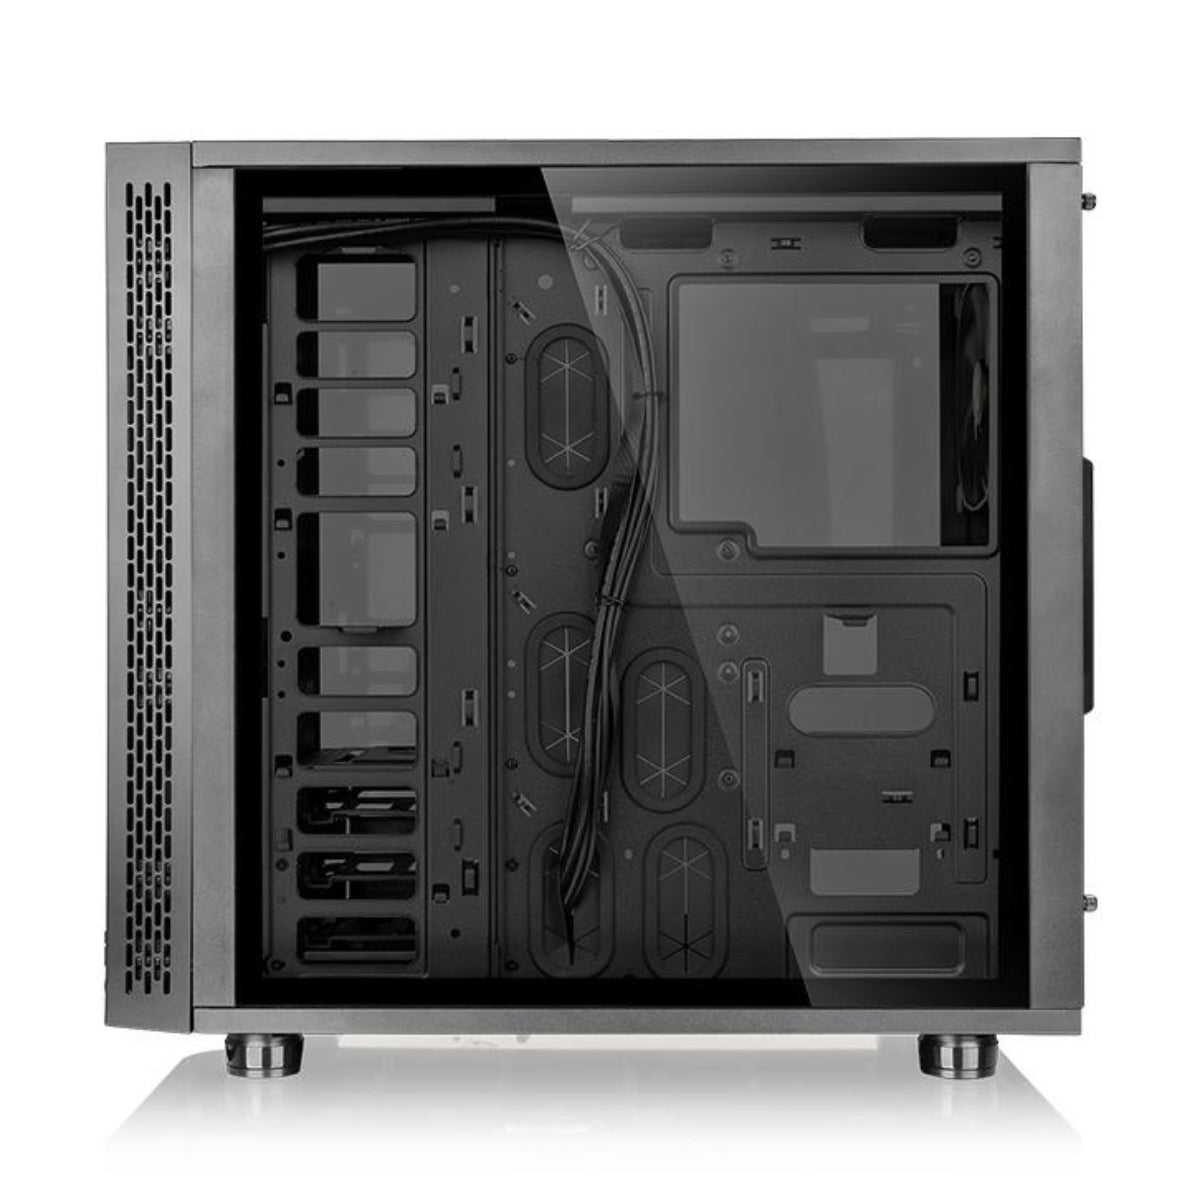 Thermaltake View 31 TG RGB Edition ATX Mid Tower Chassis - Store 974 | ستور ٩٧٤